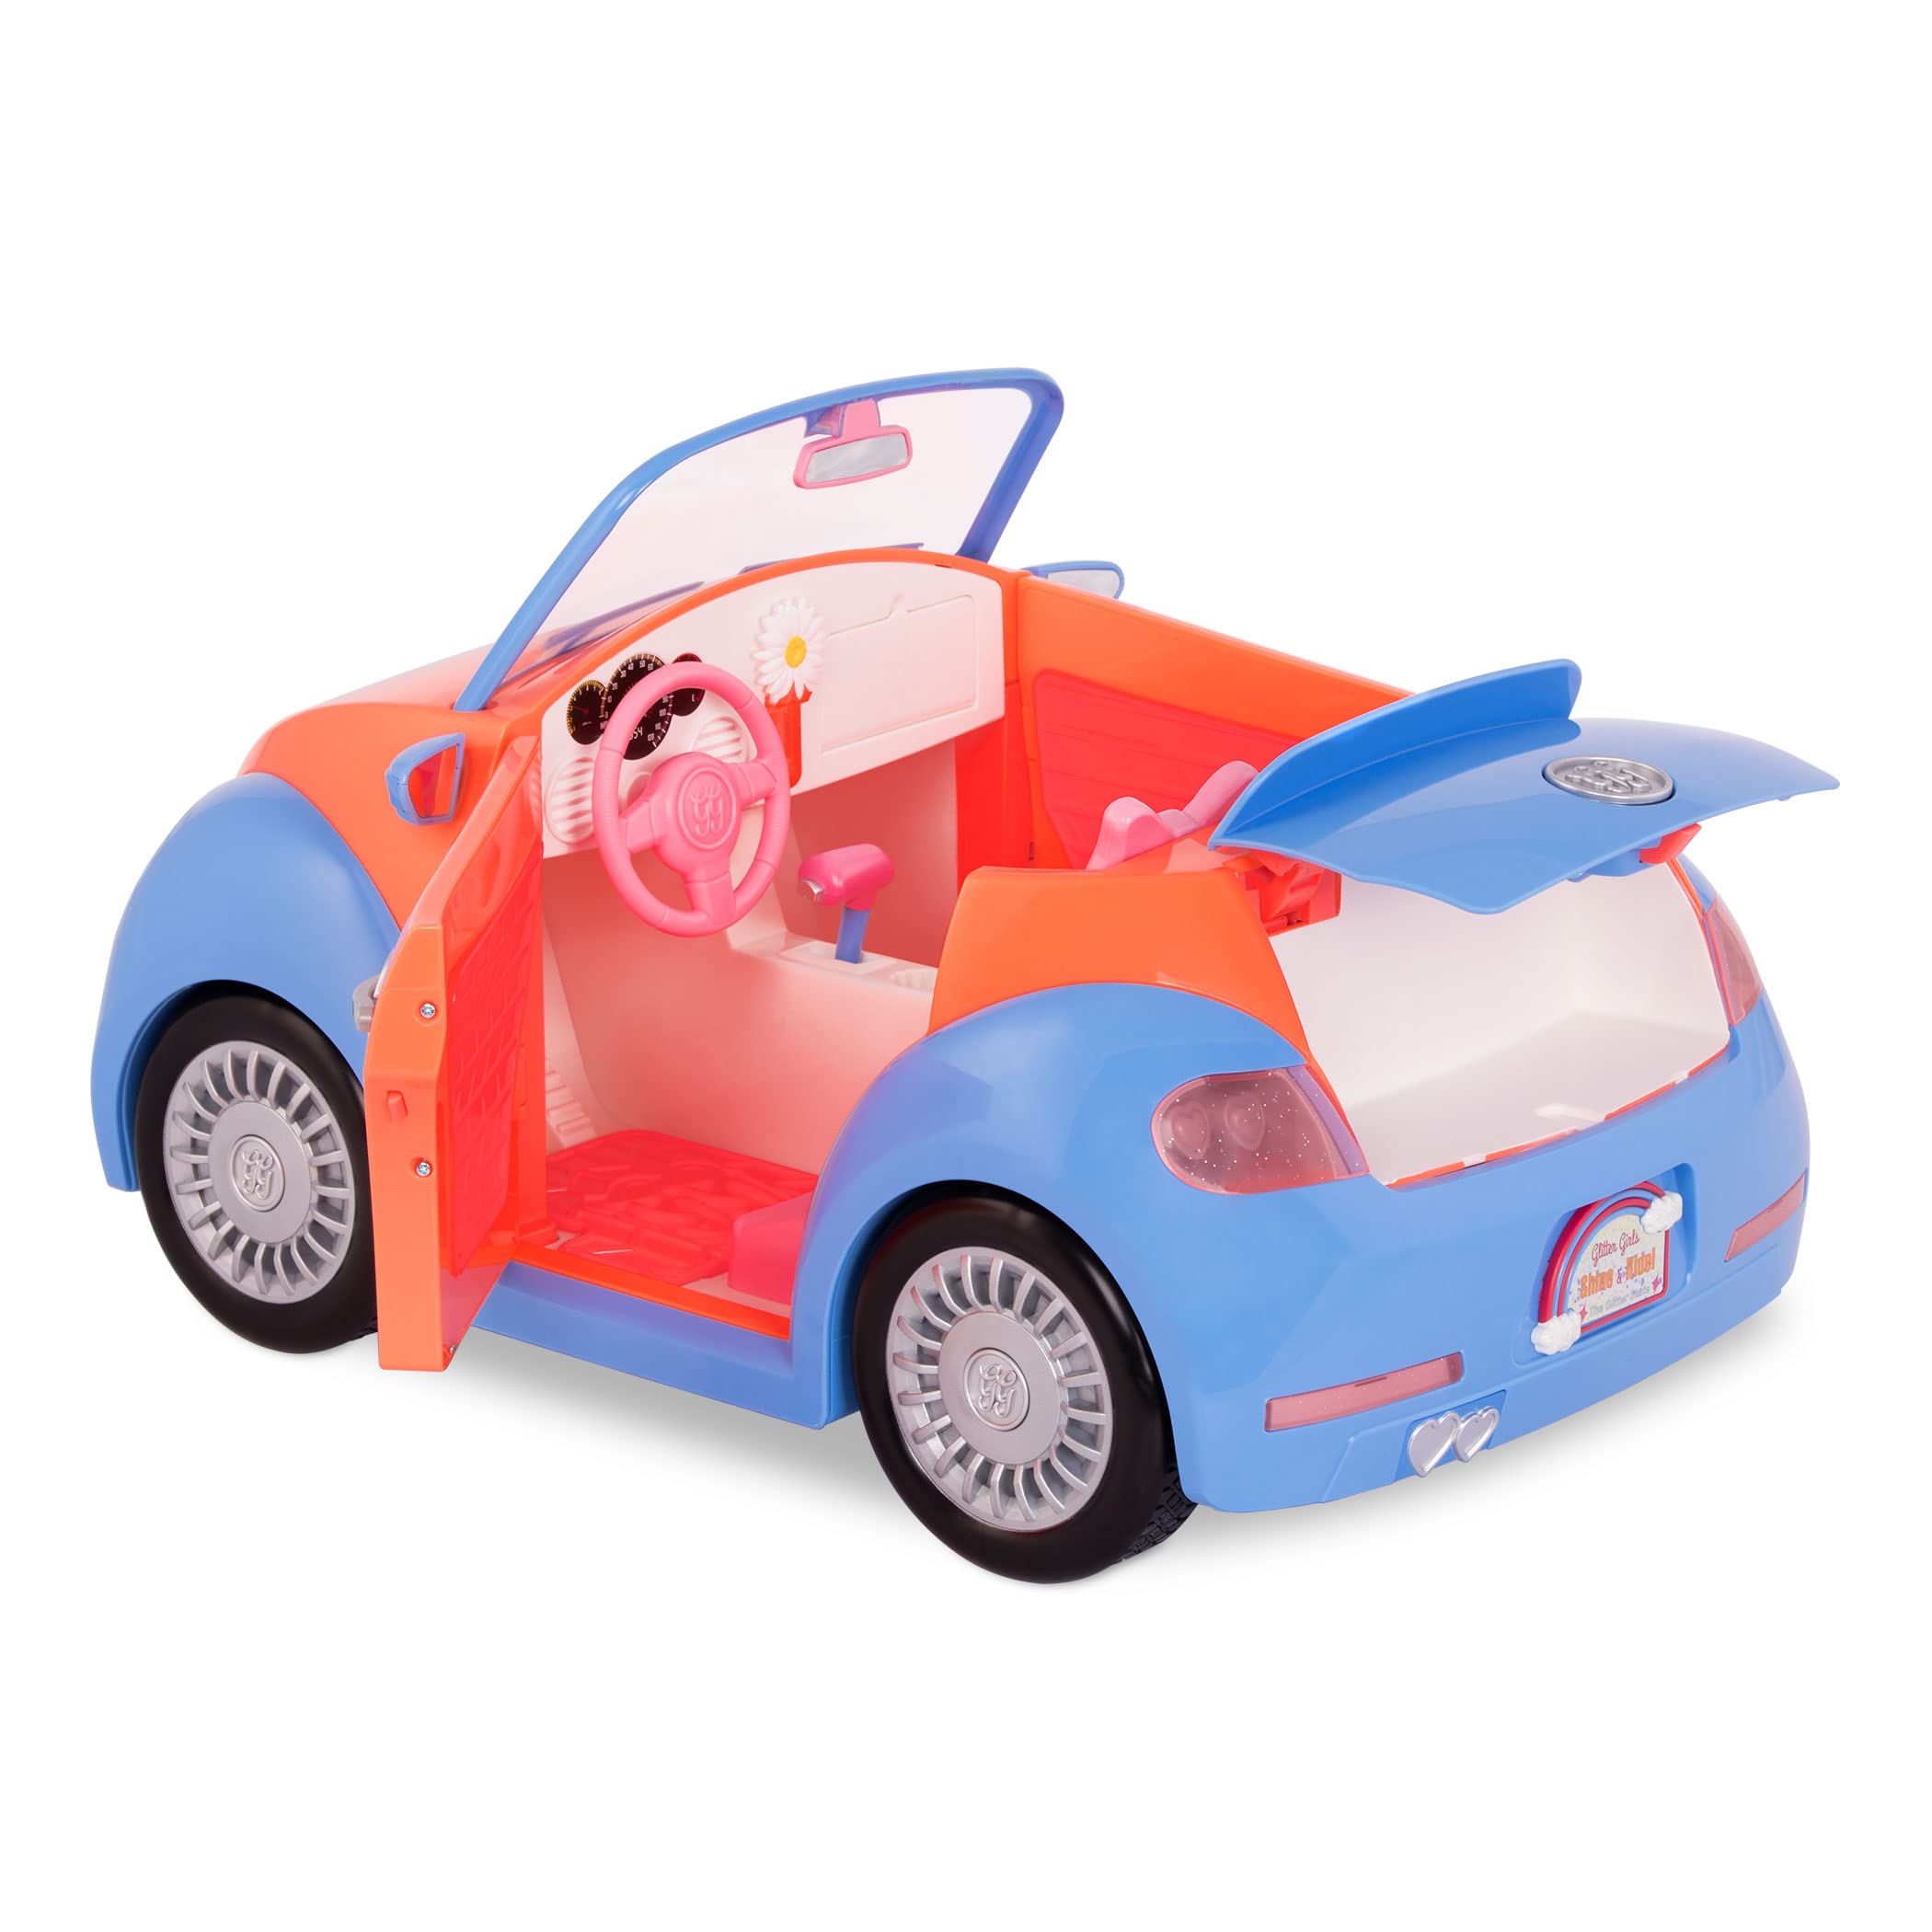 Glitter Girls - Convertible Car for 14-inch Dolls - Toys, Clothes & Accessories for Girls 3-Year-Old & Up, Blue, Orange, Pink